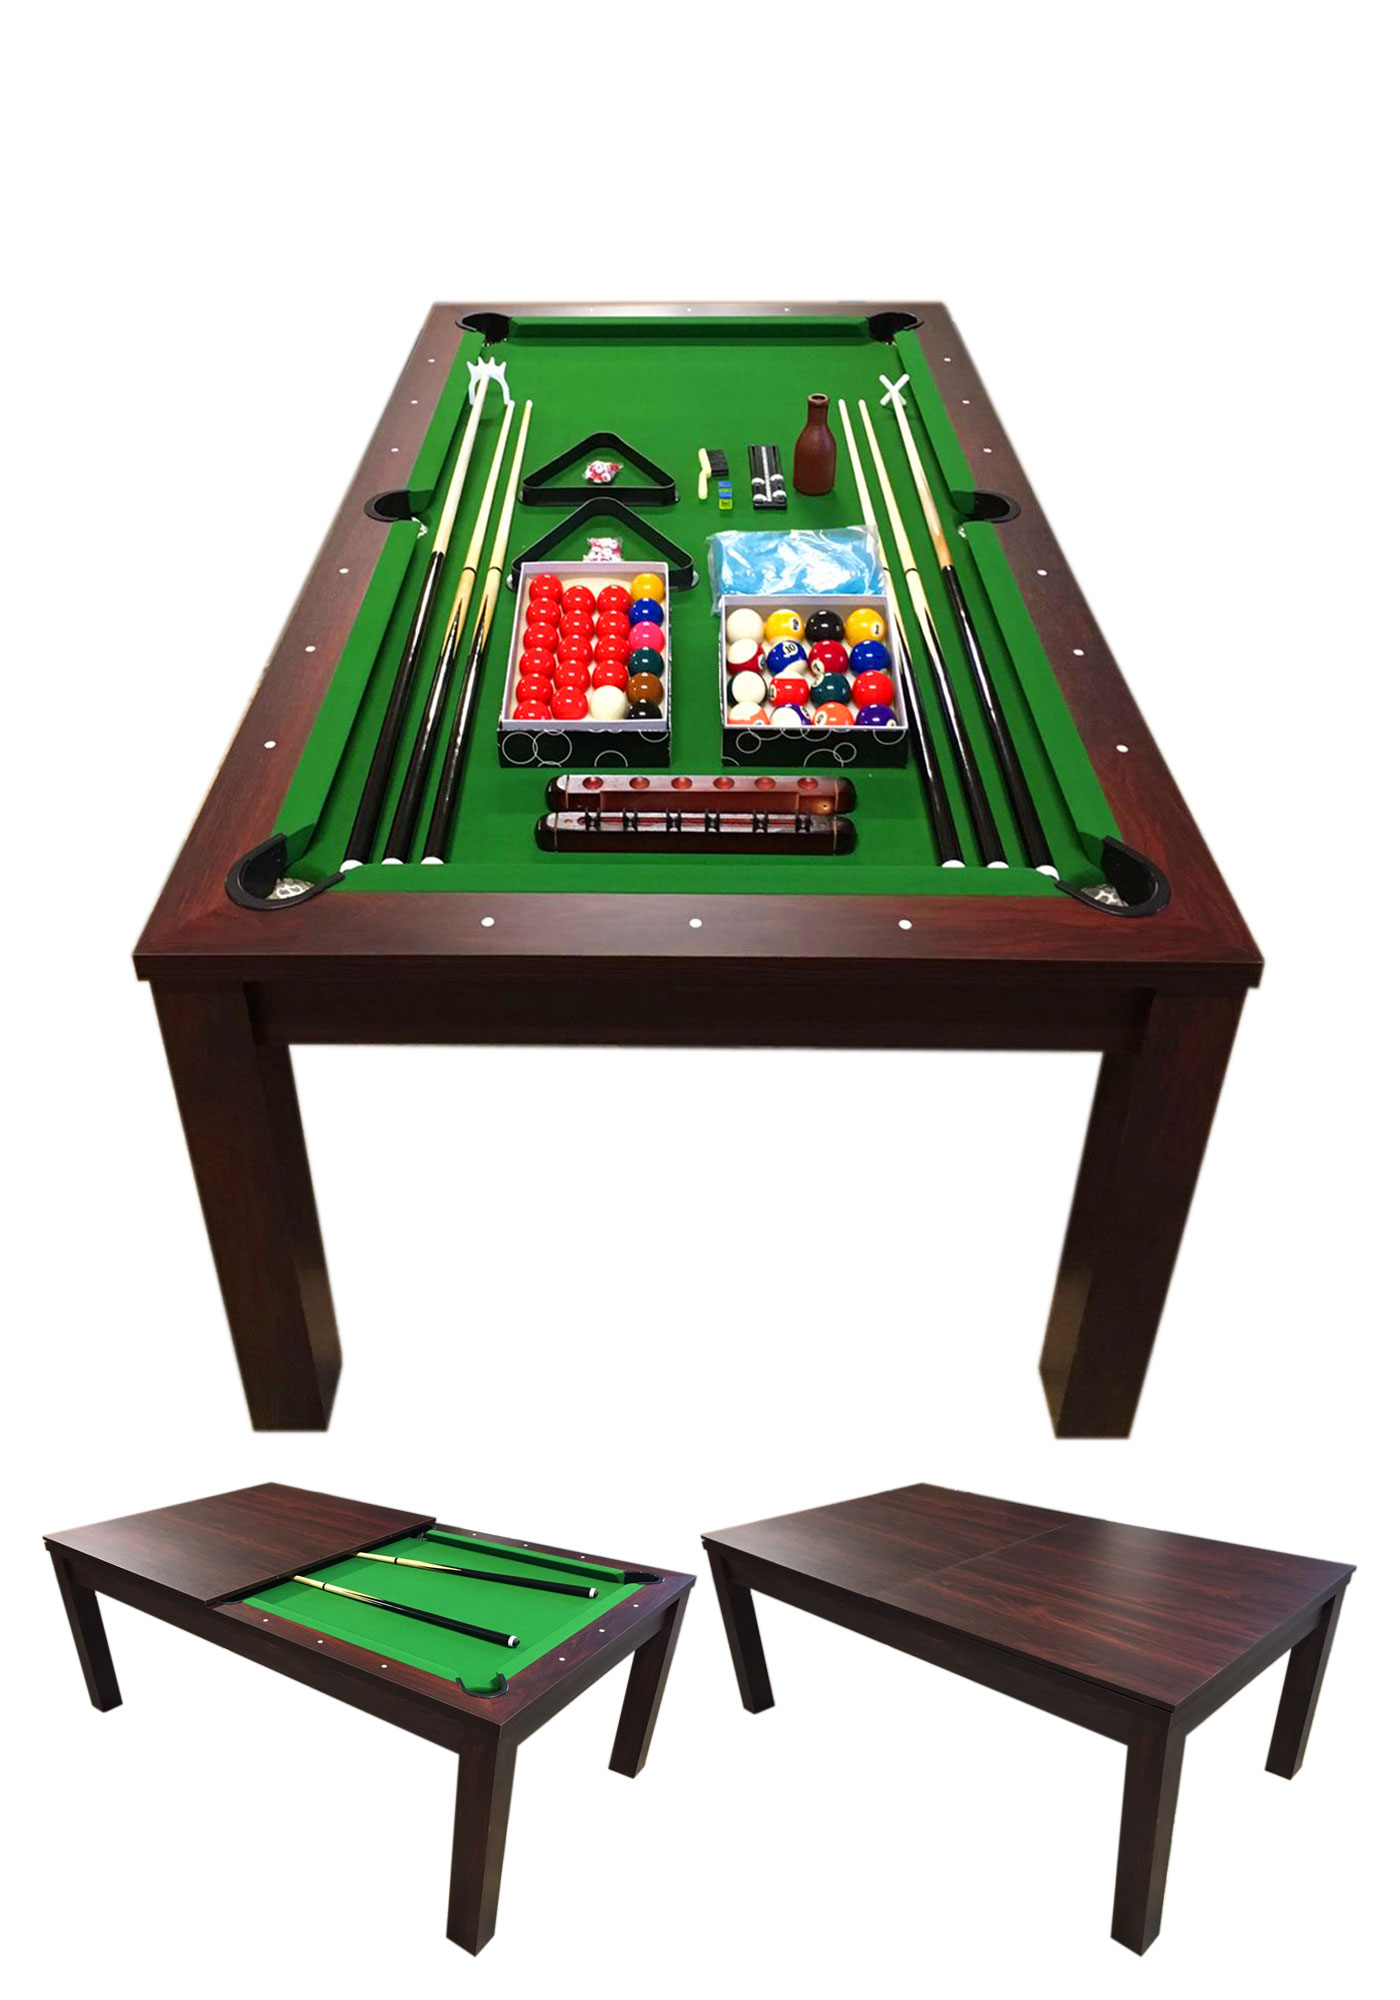 SIMBAUSA 7FT POOL TABLE Model MISSISIPI Snooker Full Accessories BECOME A BEAUTIFUL TABLE